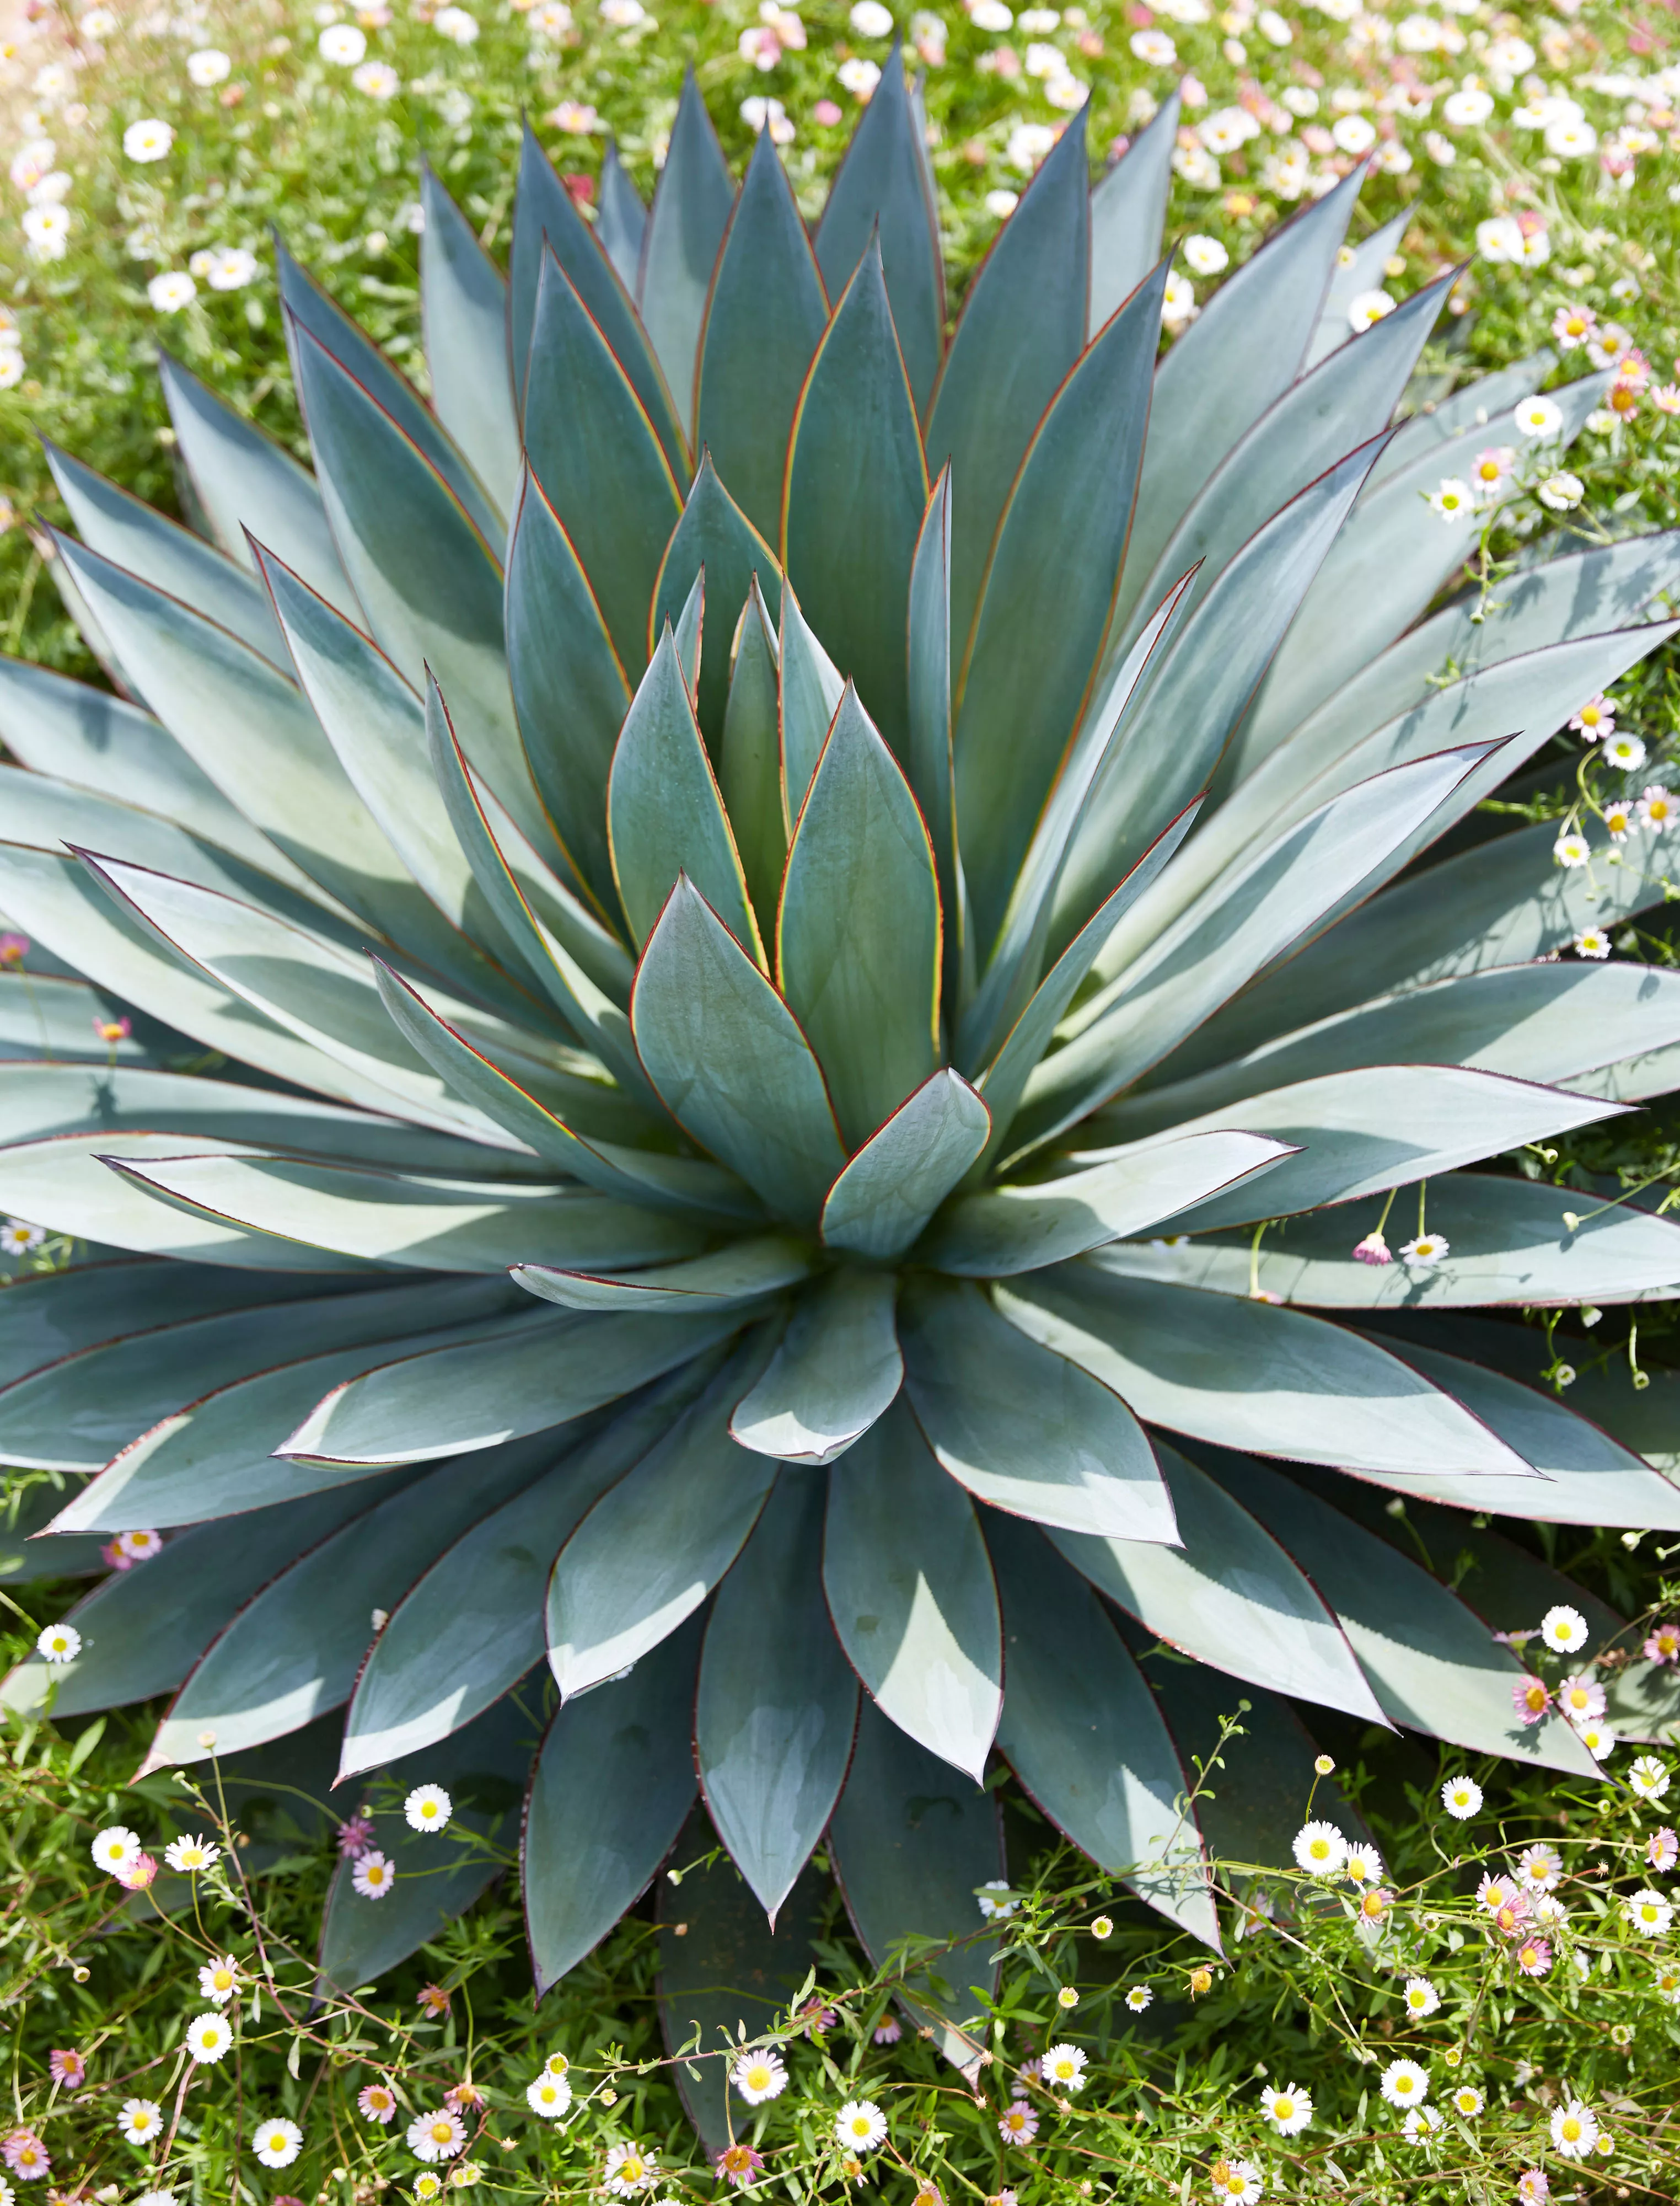 Agave "Blue Glow"; High angle view of plants growing in garden